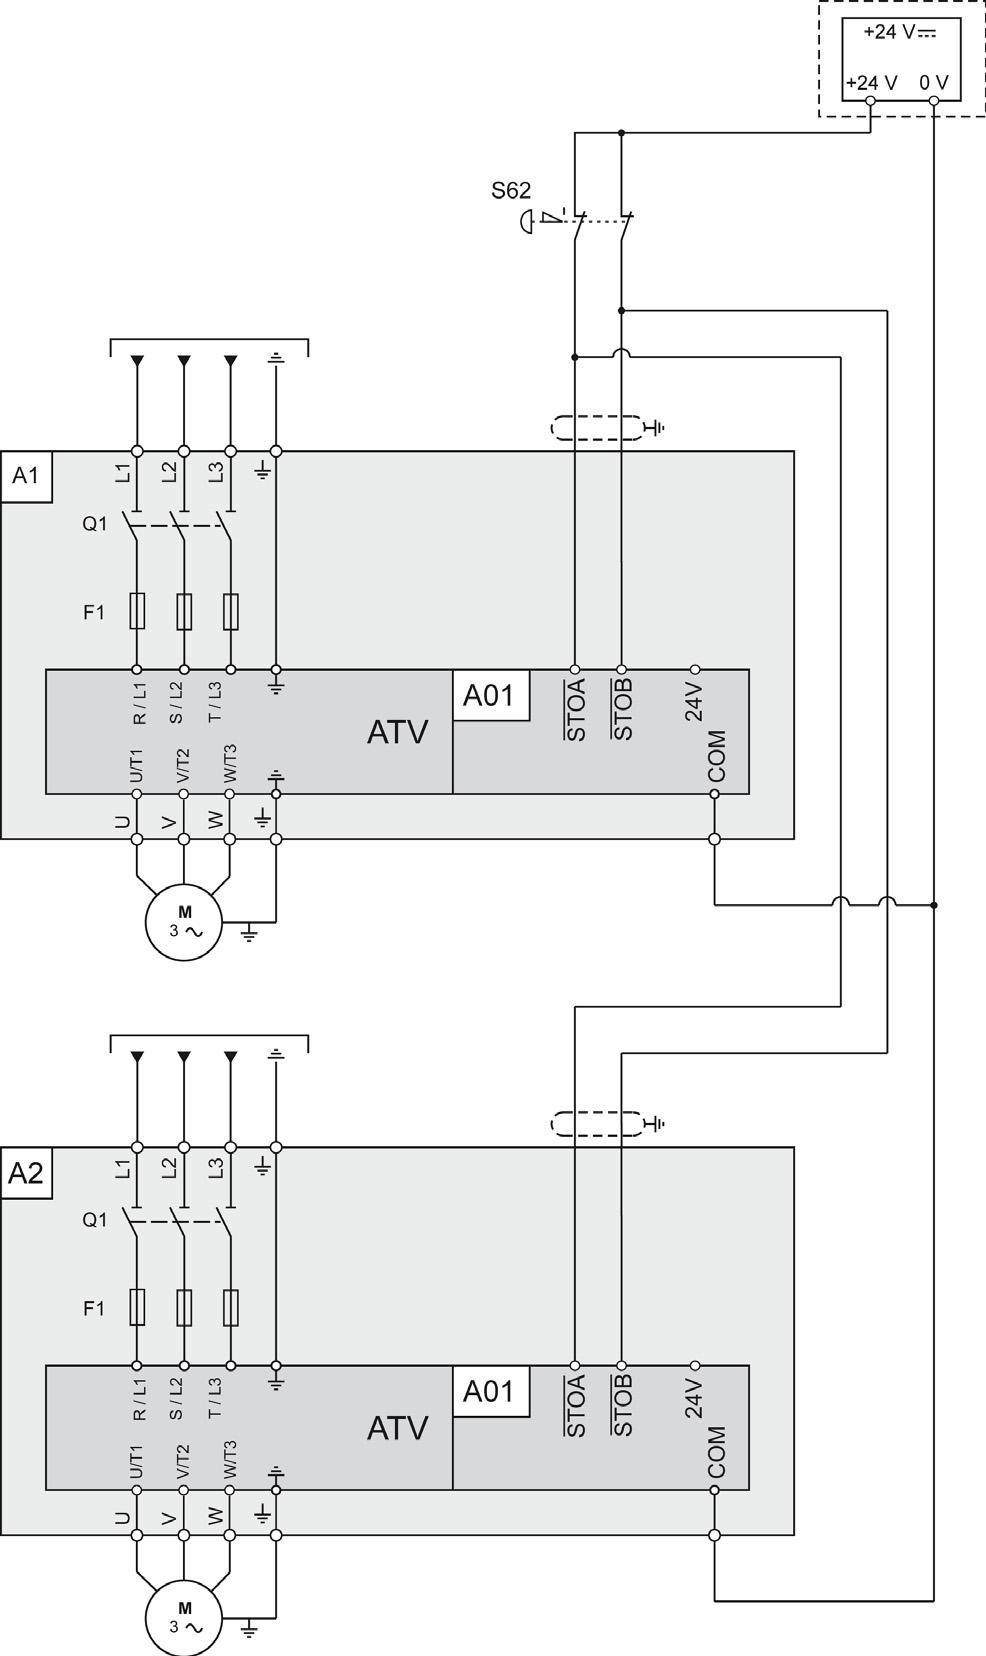 Multi drive Drive Systems Connection Diagram This connection diagram applies for multidrive Altivar Process Drive Systems configuration, without options, according to IEC 61508 capability SIL 3, ISO